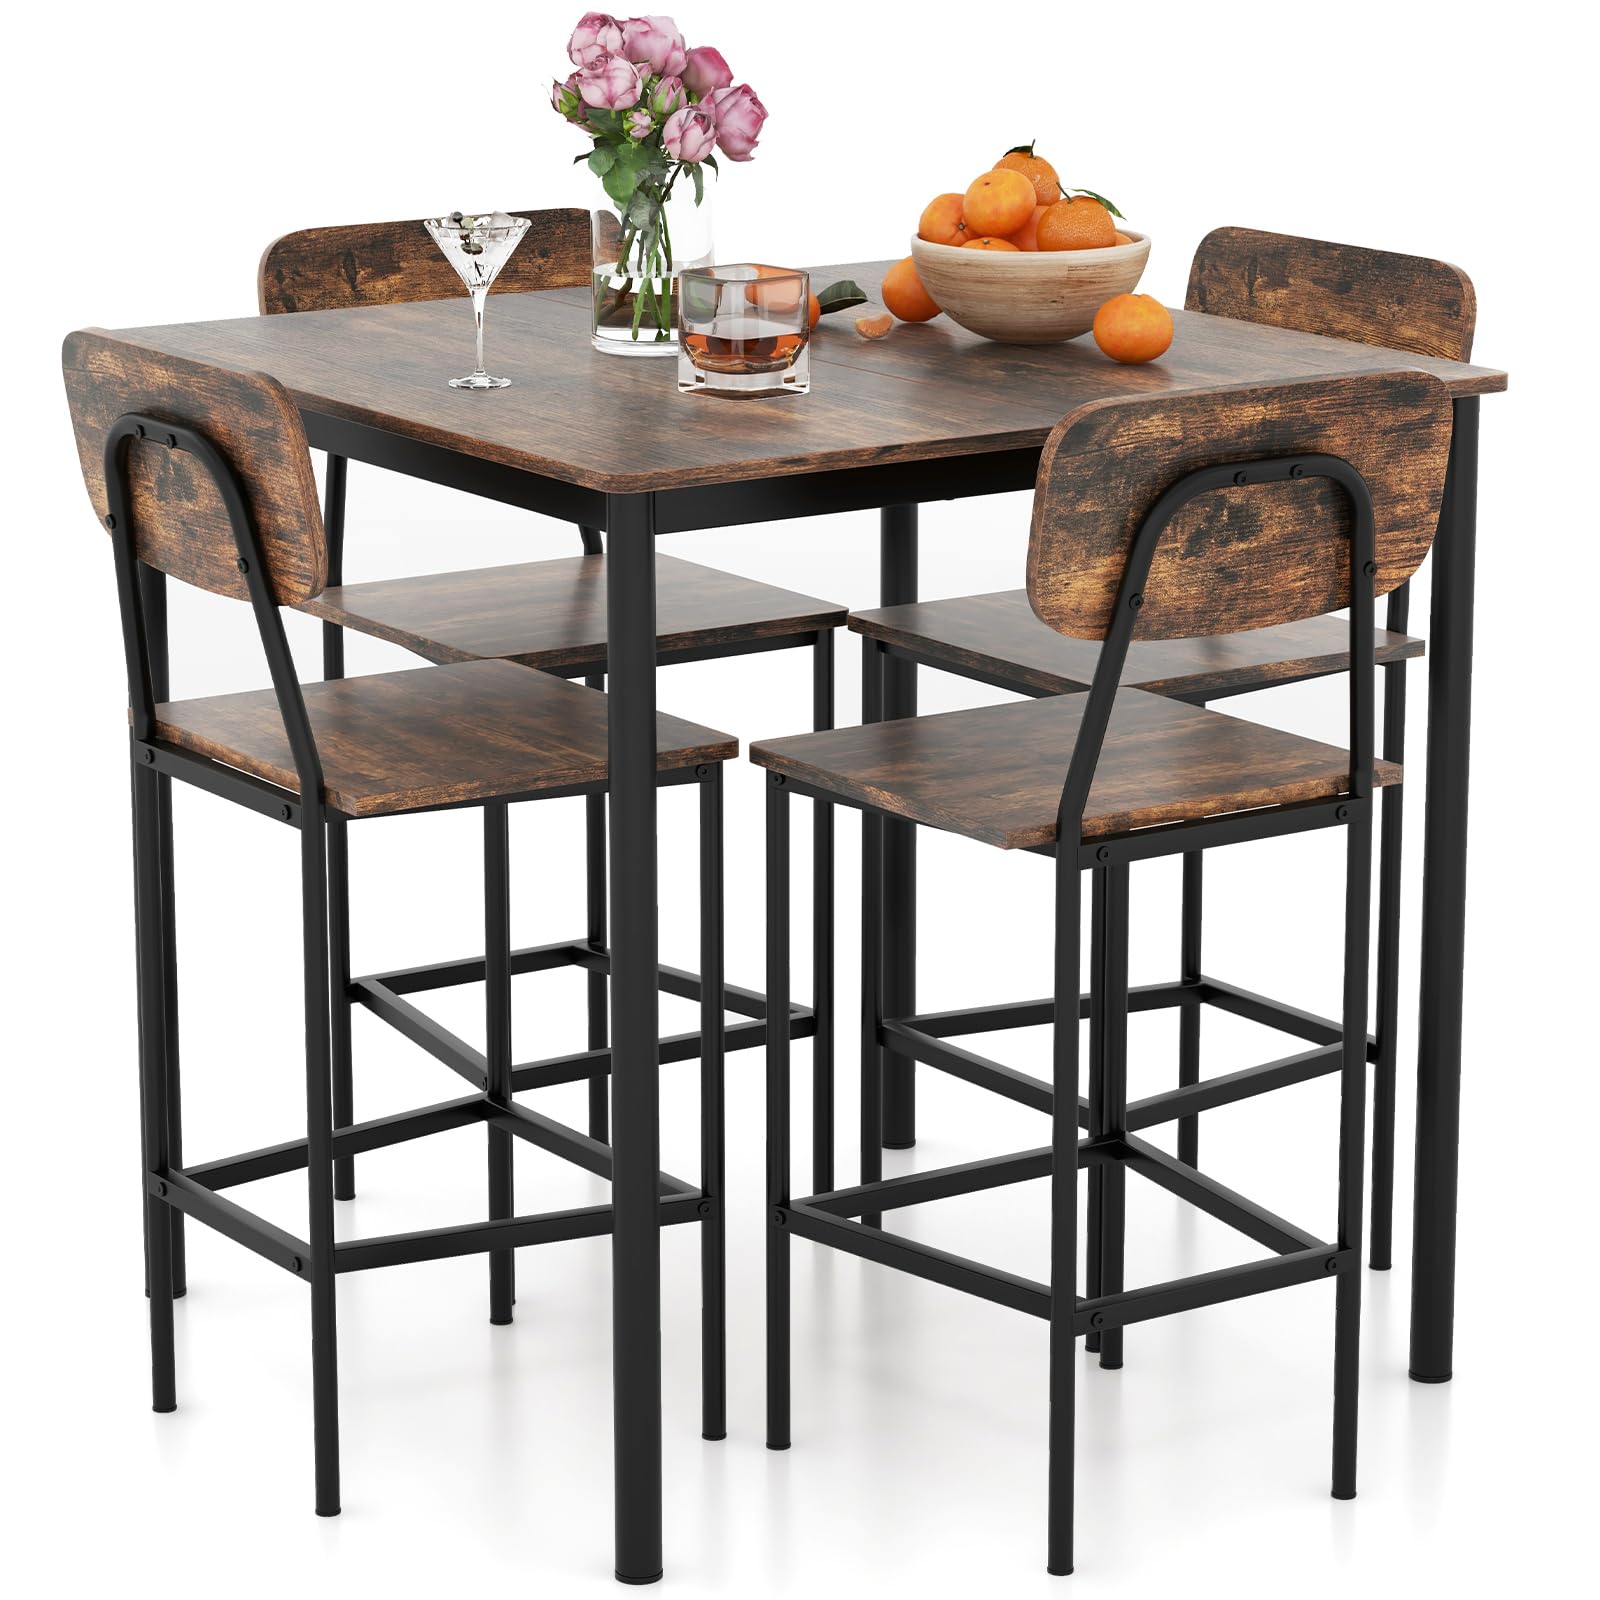 Giantex 5-Piece Dining Table Set W/Counter Height Table & 4 Bar Stools